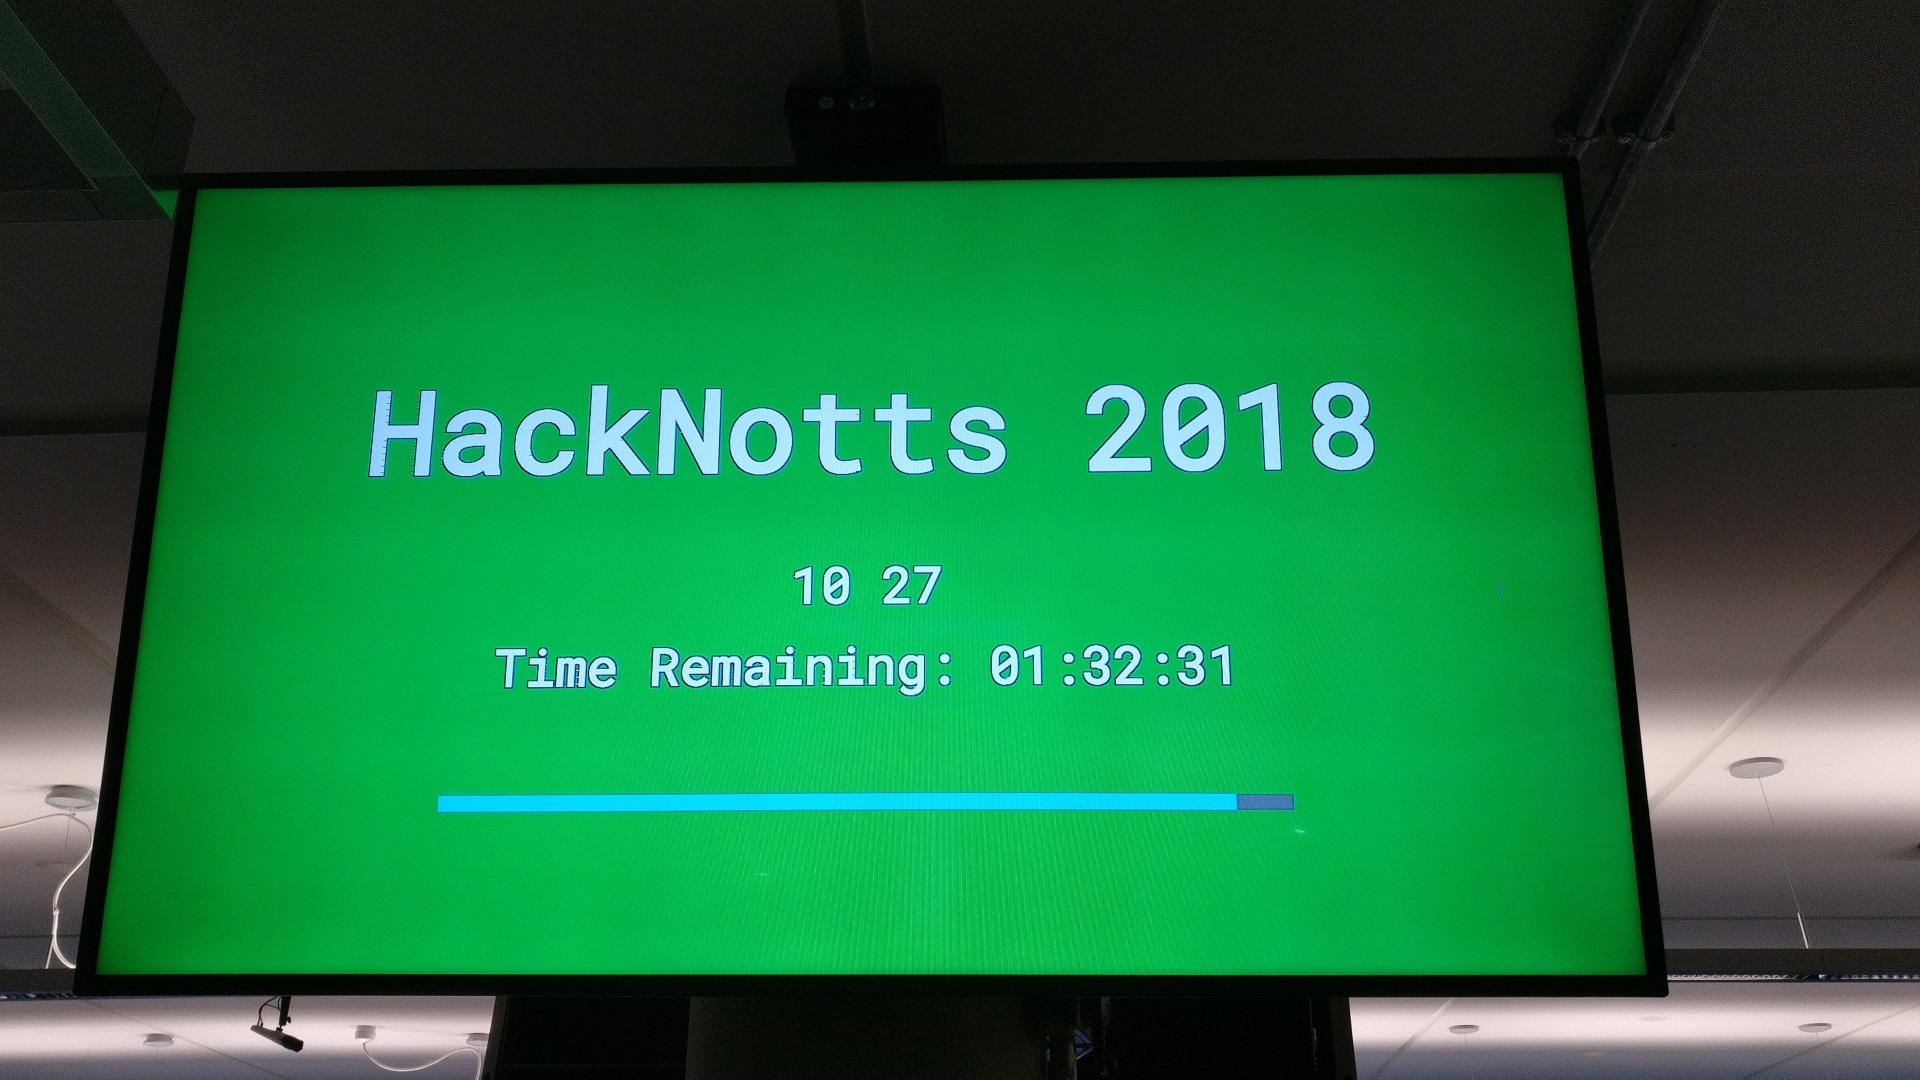 A television mounted on a pillar shows the text "HackNotts 2018", with the time 10:27 visible in small text below it. Below that, the remaining time remaining is shown as "01:32:32", and a progress bar is about 90% complete.